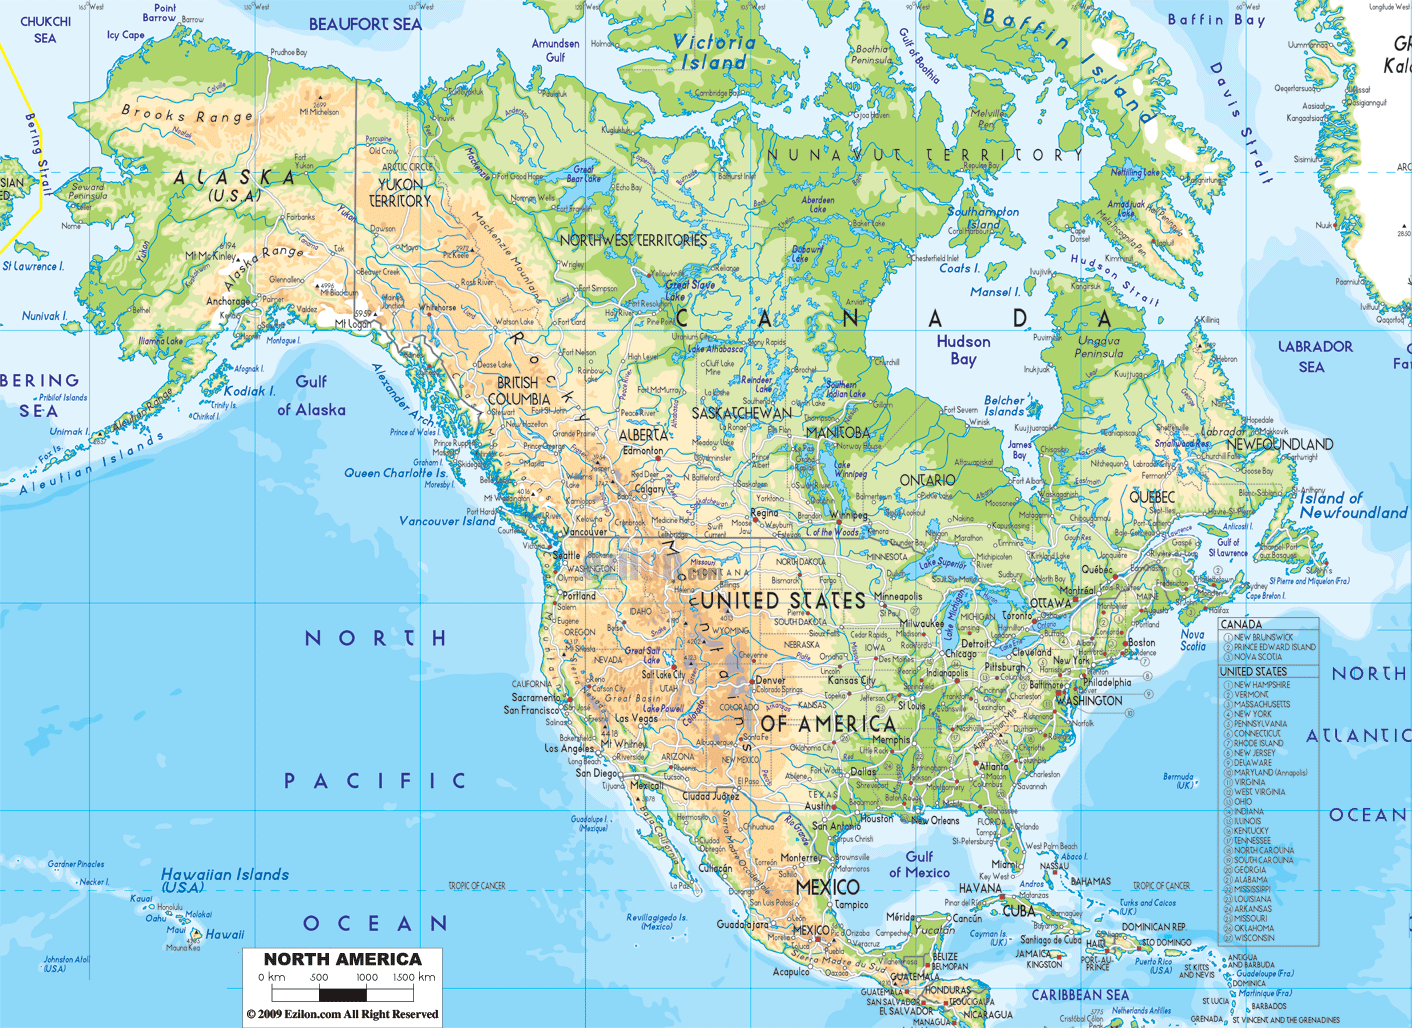 Physical Map of North America showing major geographical features like elevations, mountain ranges, deserts, seas, oceans, lakes, plateaus, peninsulas, rivers, plains, landforms and other topographic features.